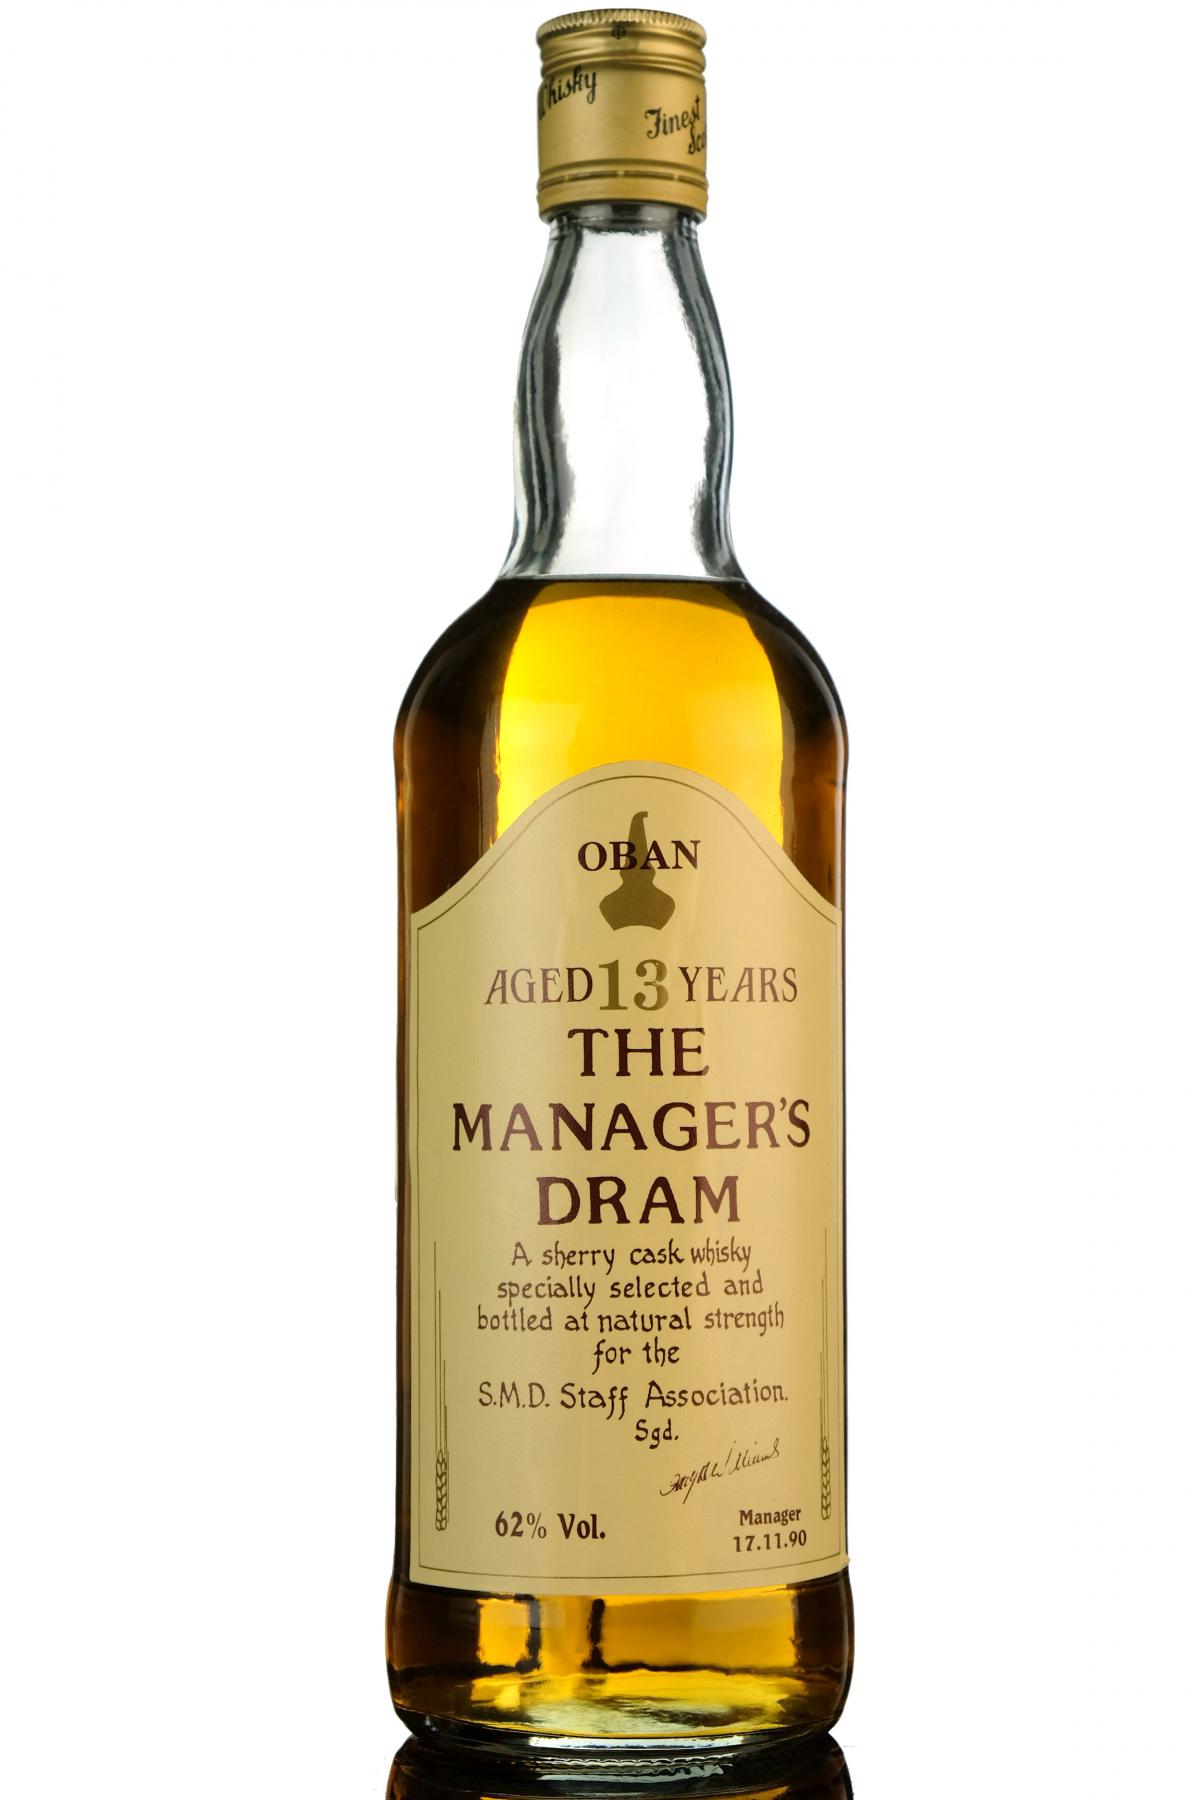 Oban 13 Year Old - Managers Dram 1990